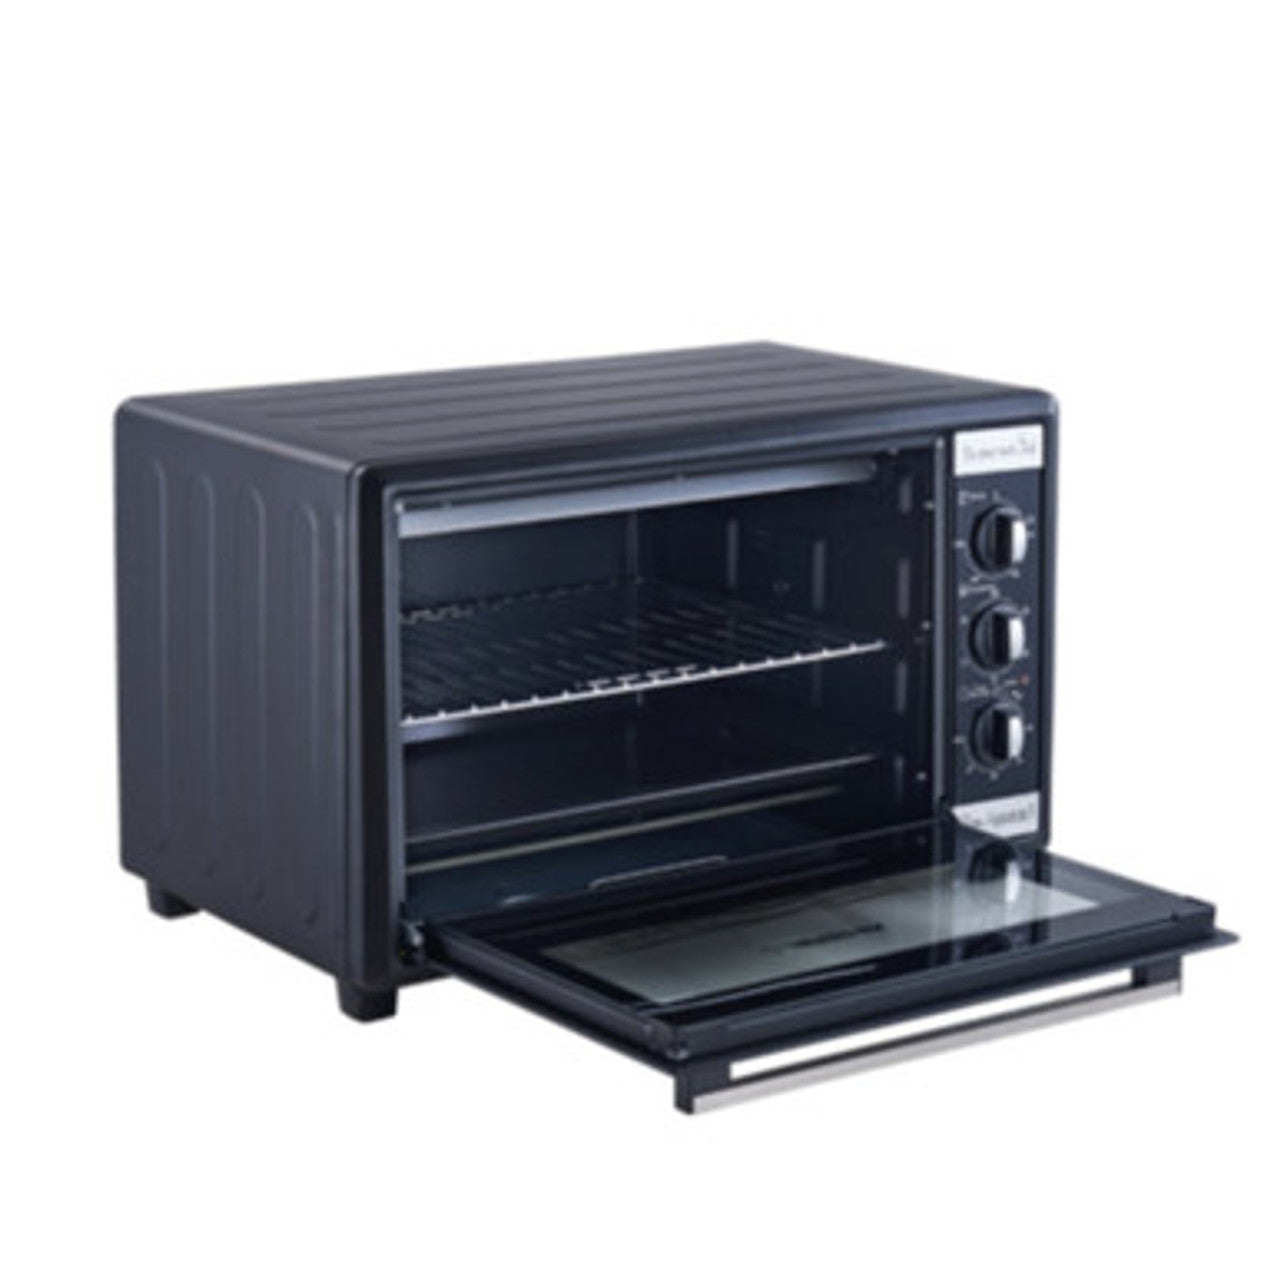 Arshia Multifunctional Toaster Oven Black Countertop 35L